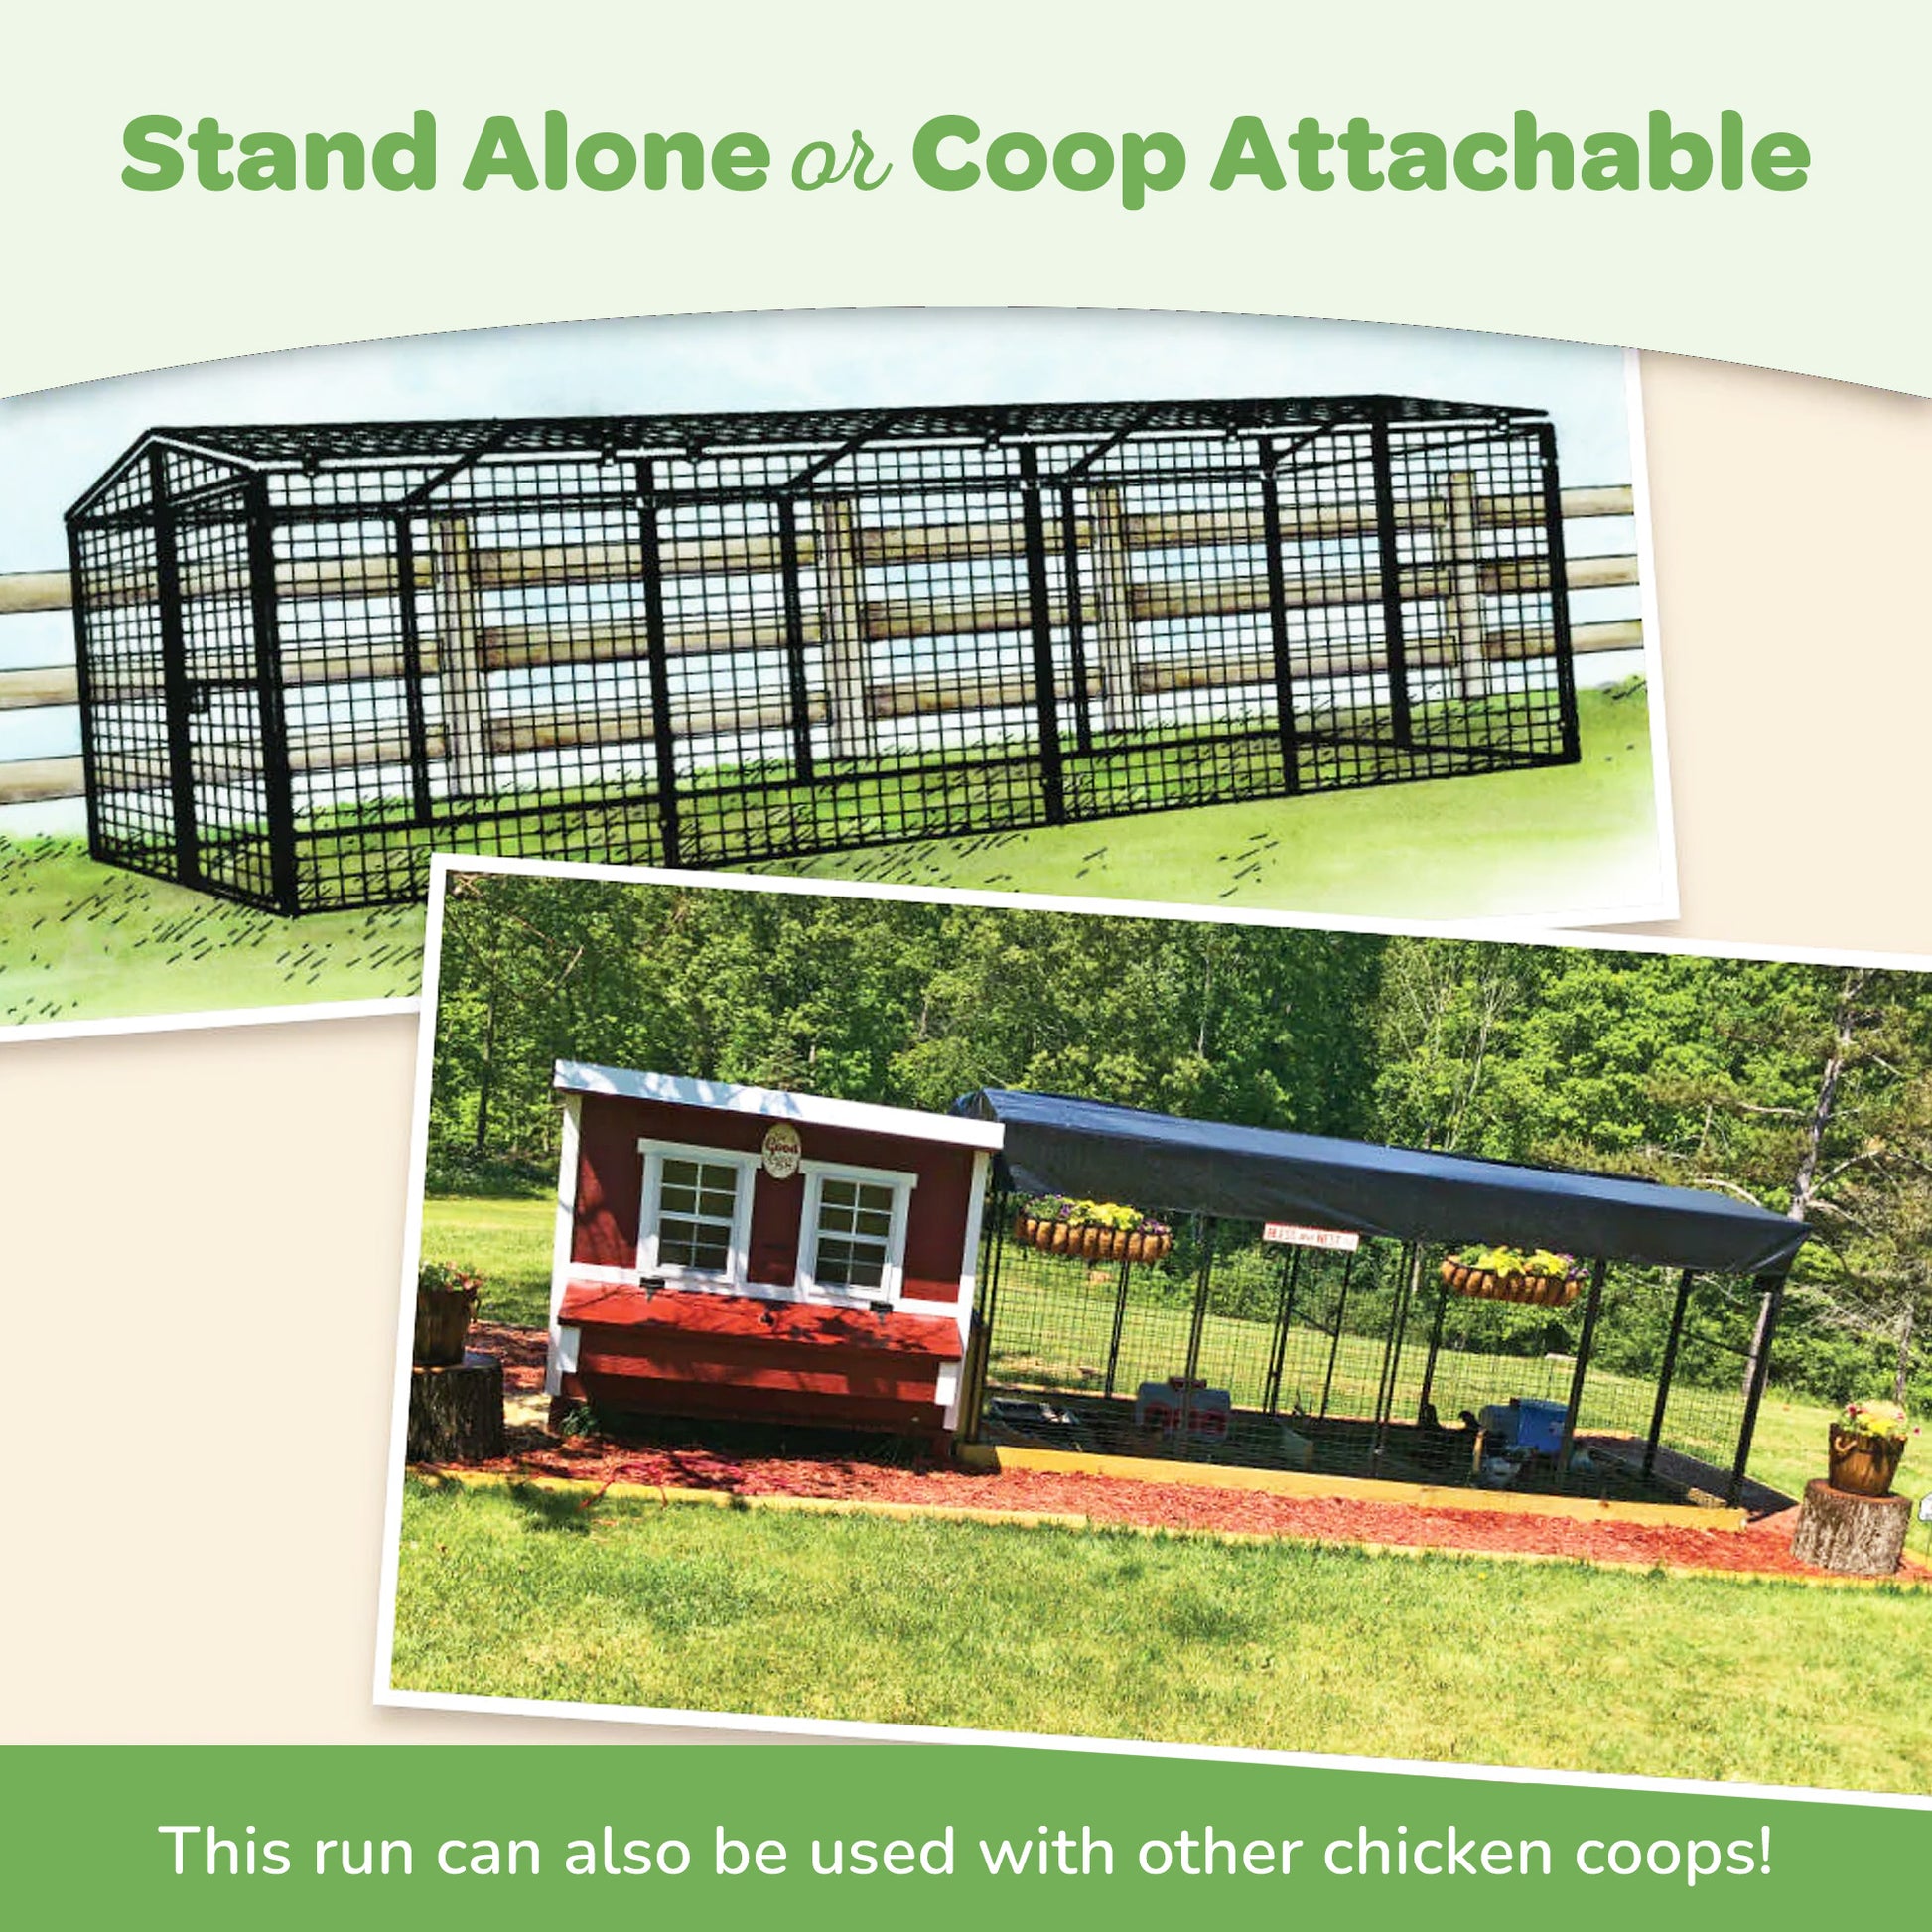 OverEZ Chicken Run, stand alone or coop attachable